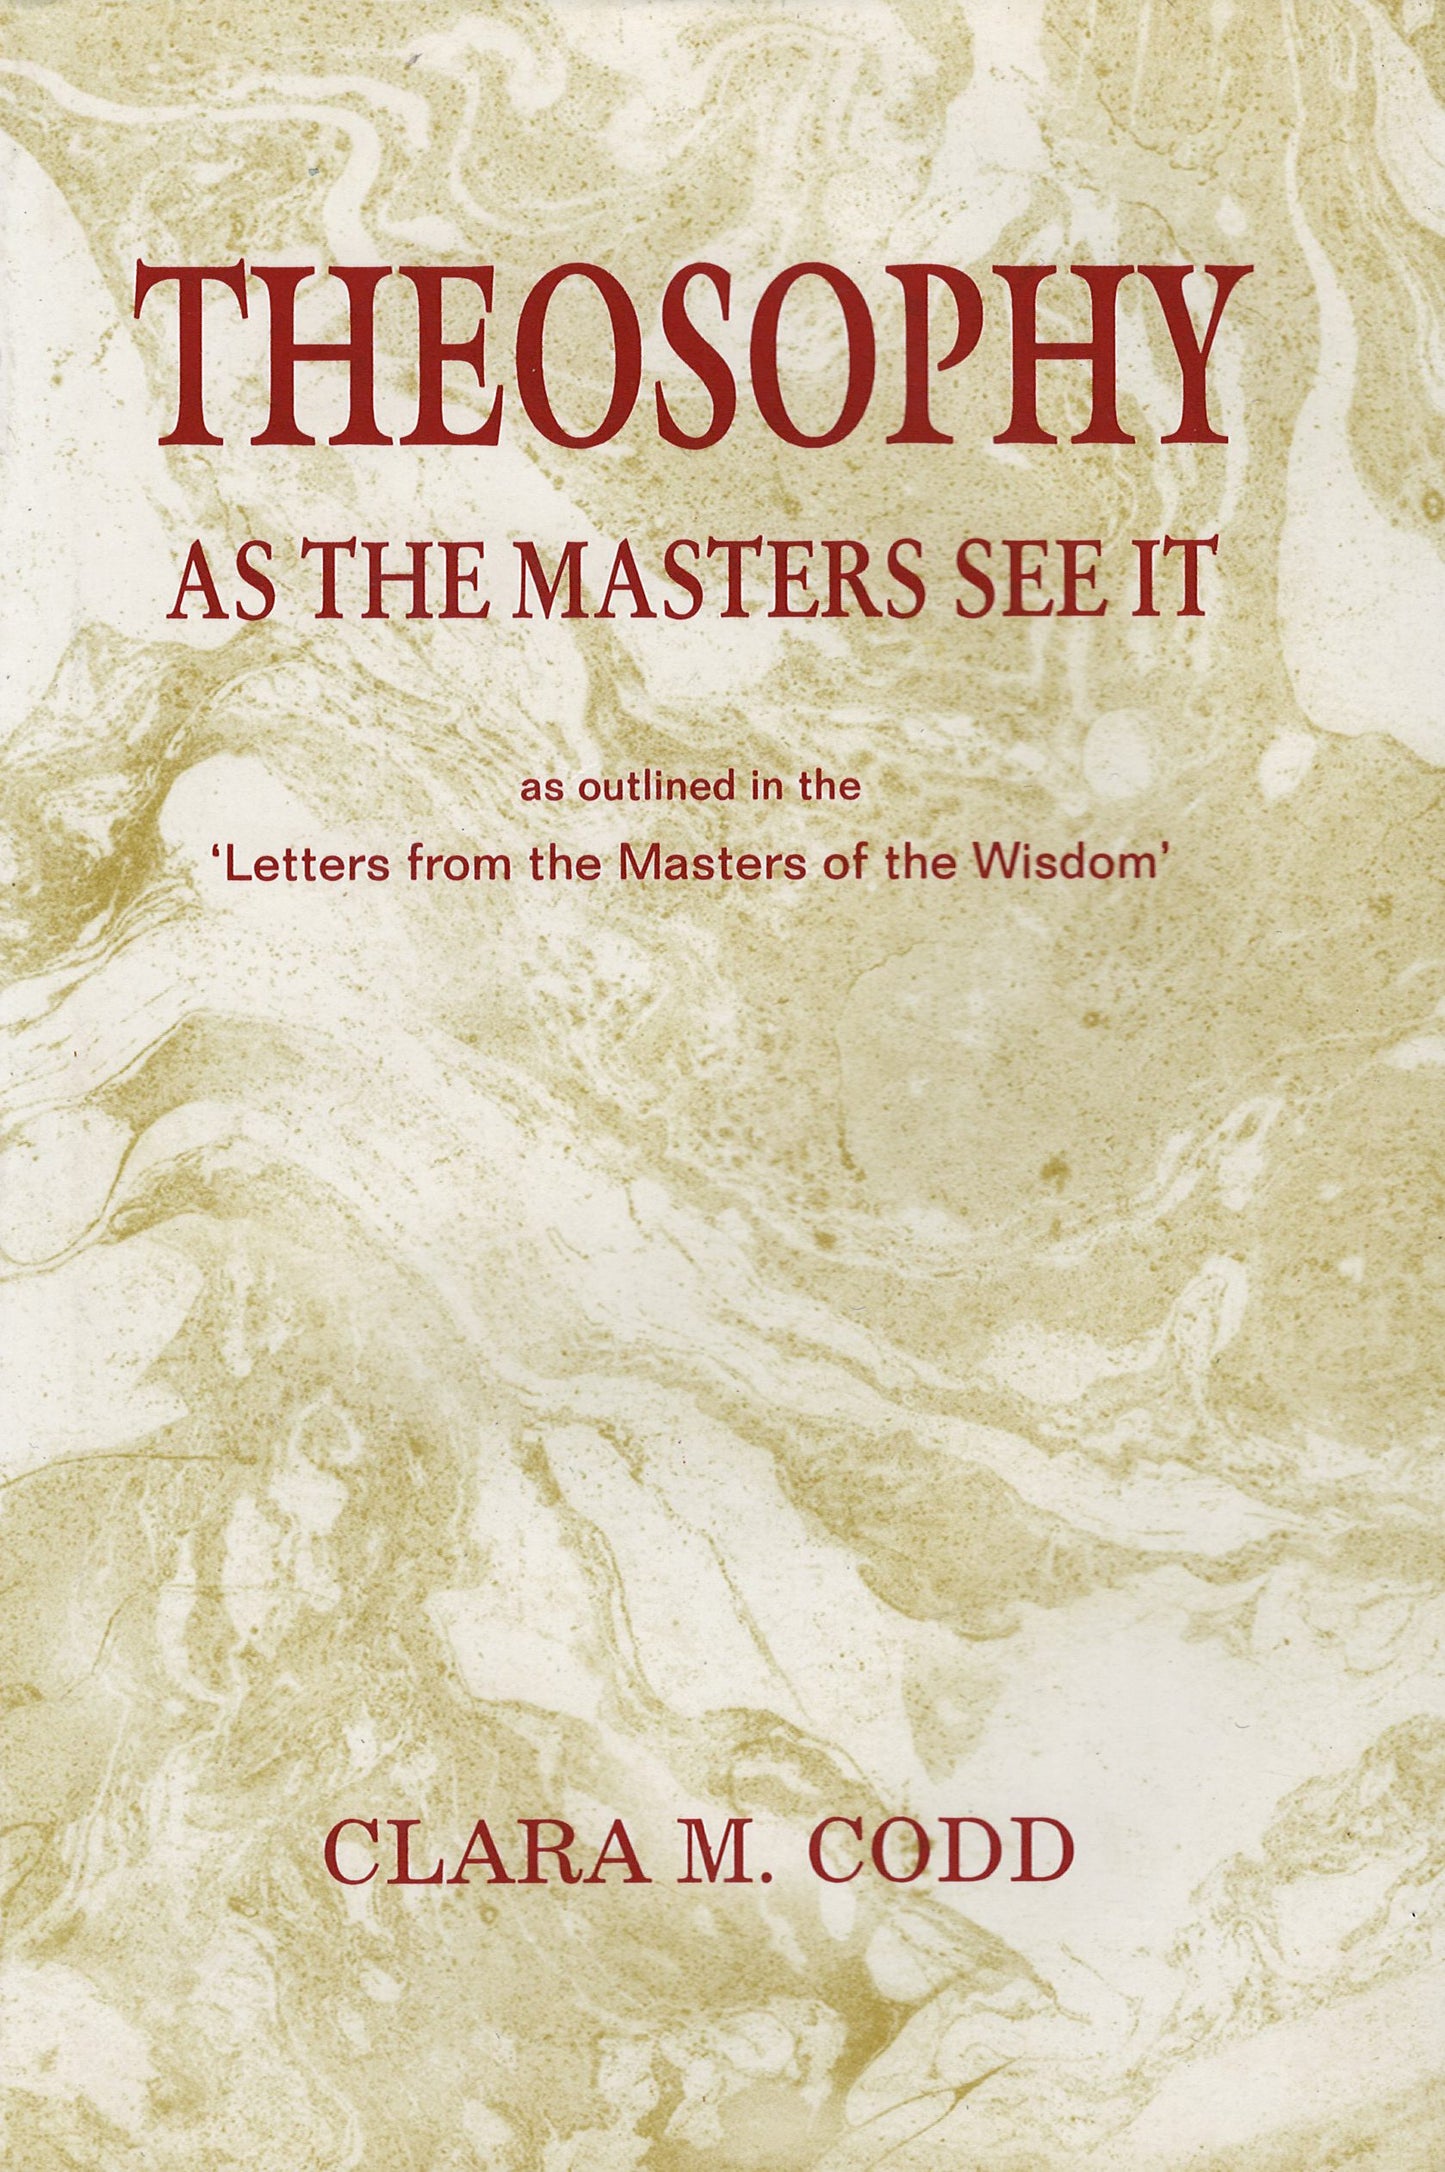 Theosophy as the Masters see it